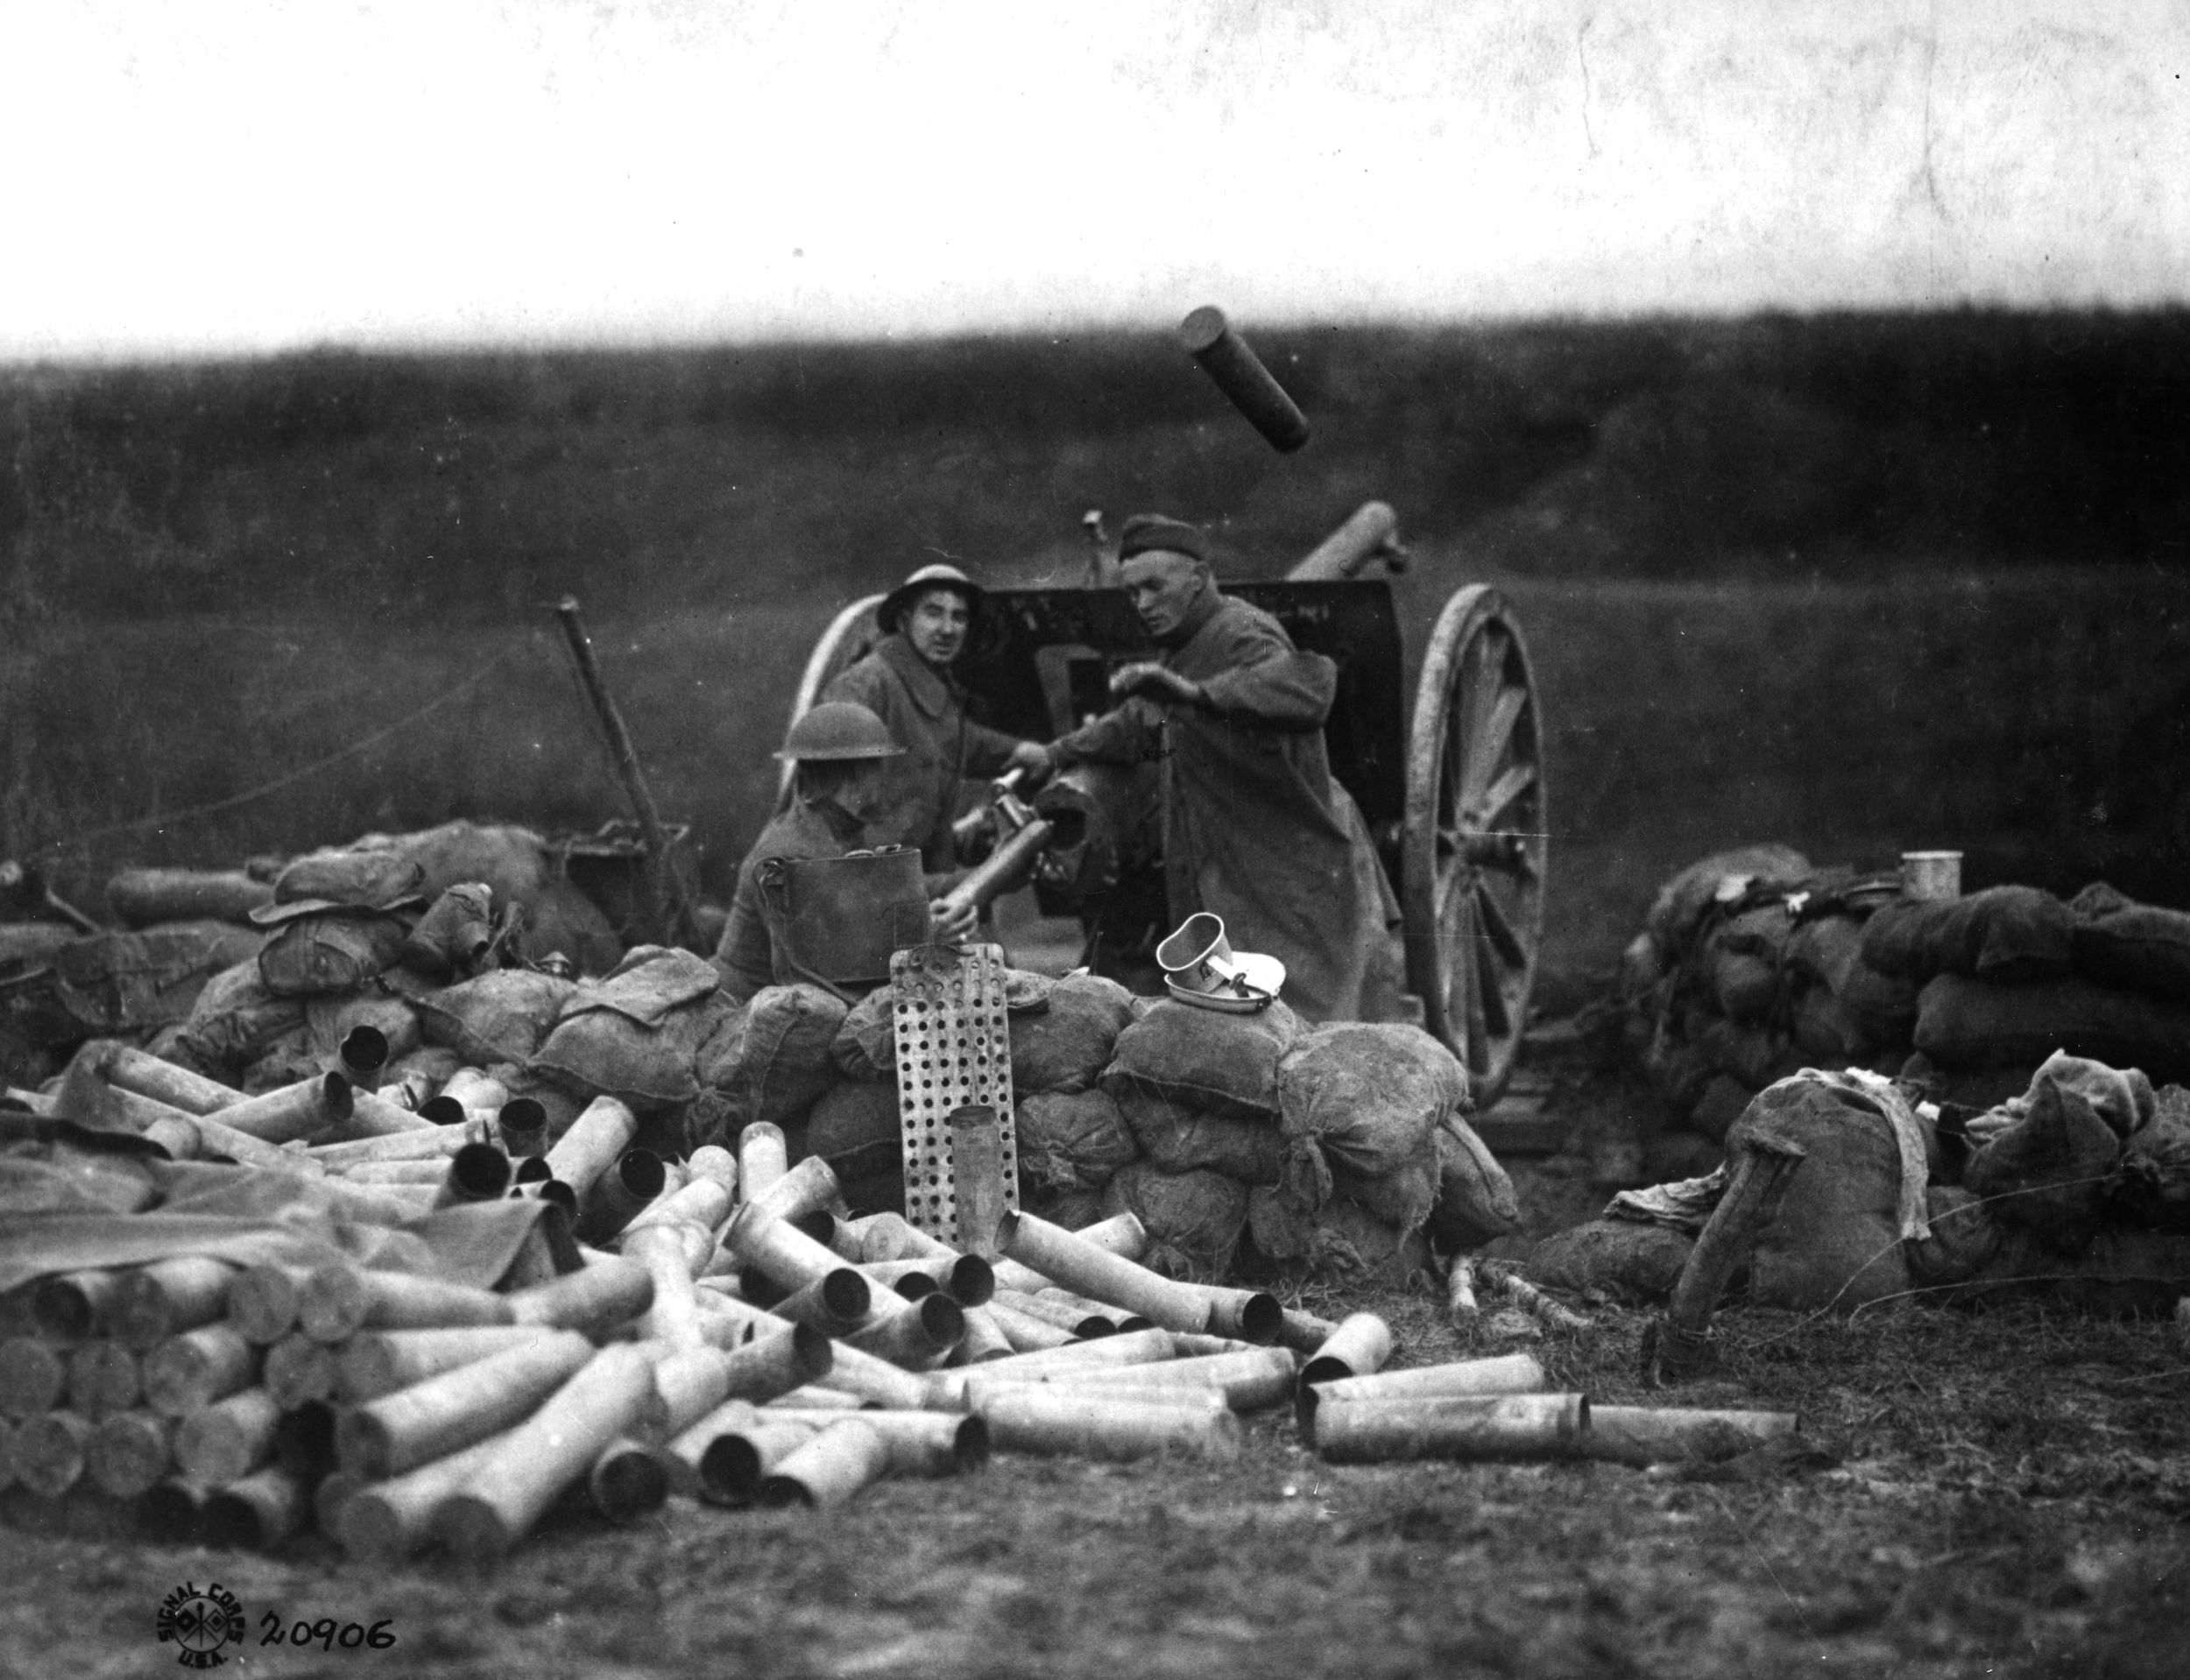 An American gun crew fires the 75mm at Saint-Michel, France, in September 1918. Note the large pile of expended shells and ammunition packing tubes behind the gun, indicating its high rate of fire. A shell casing is still in the air above the cannon.